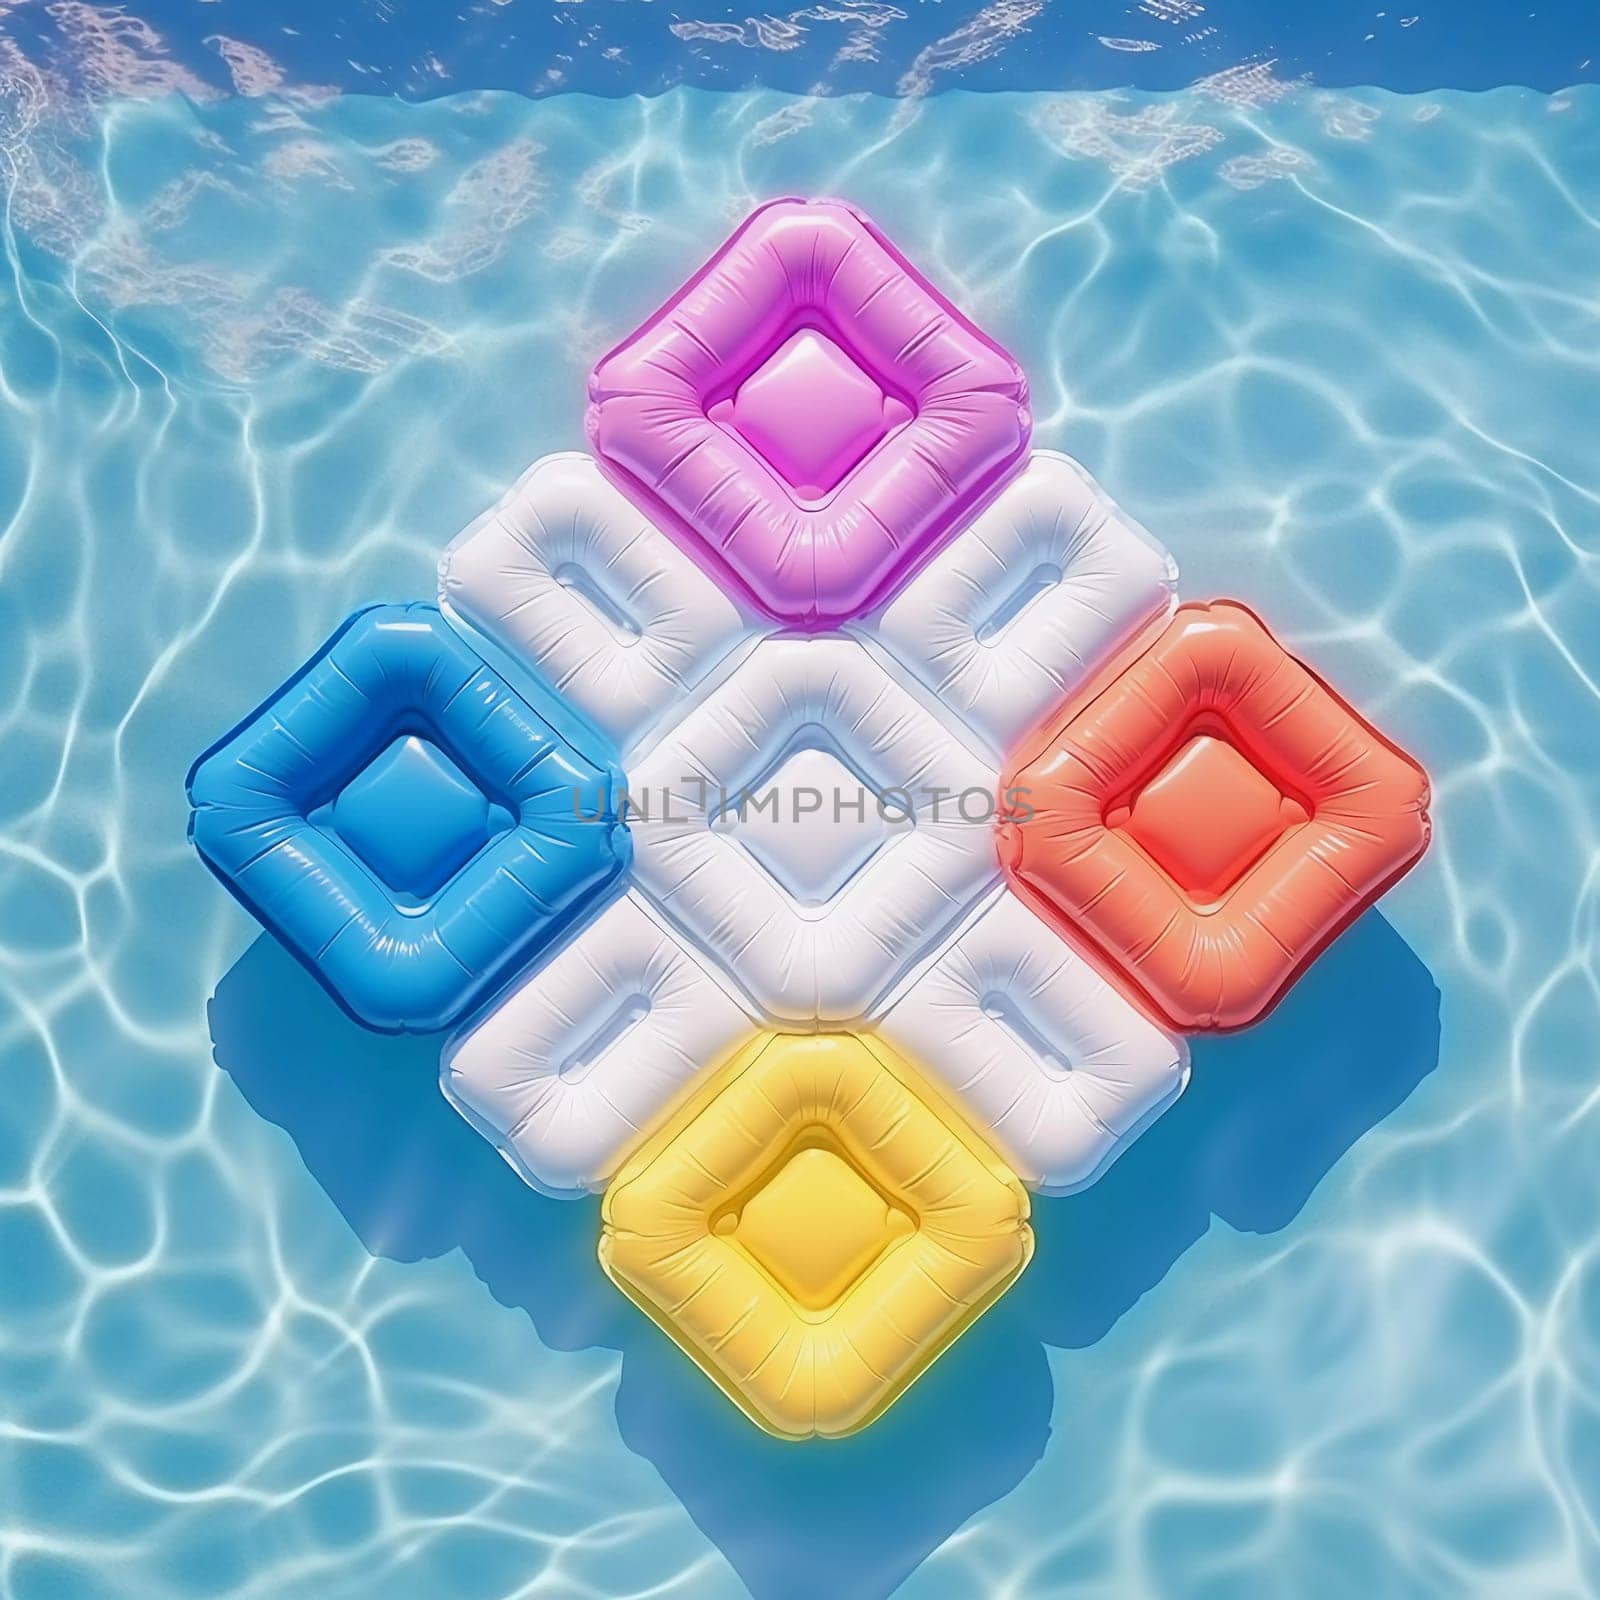 Square Colorful Air Mattress. Floats on the surface of the water in the pool. Summer colorful vacation background.